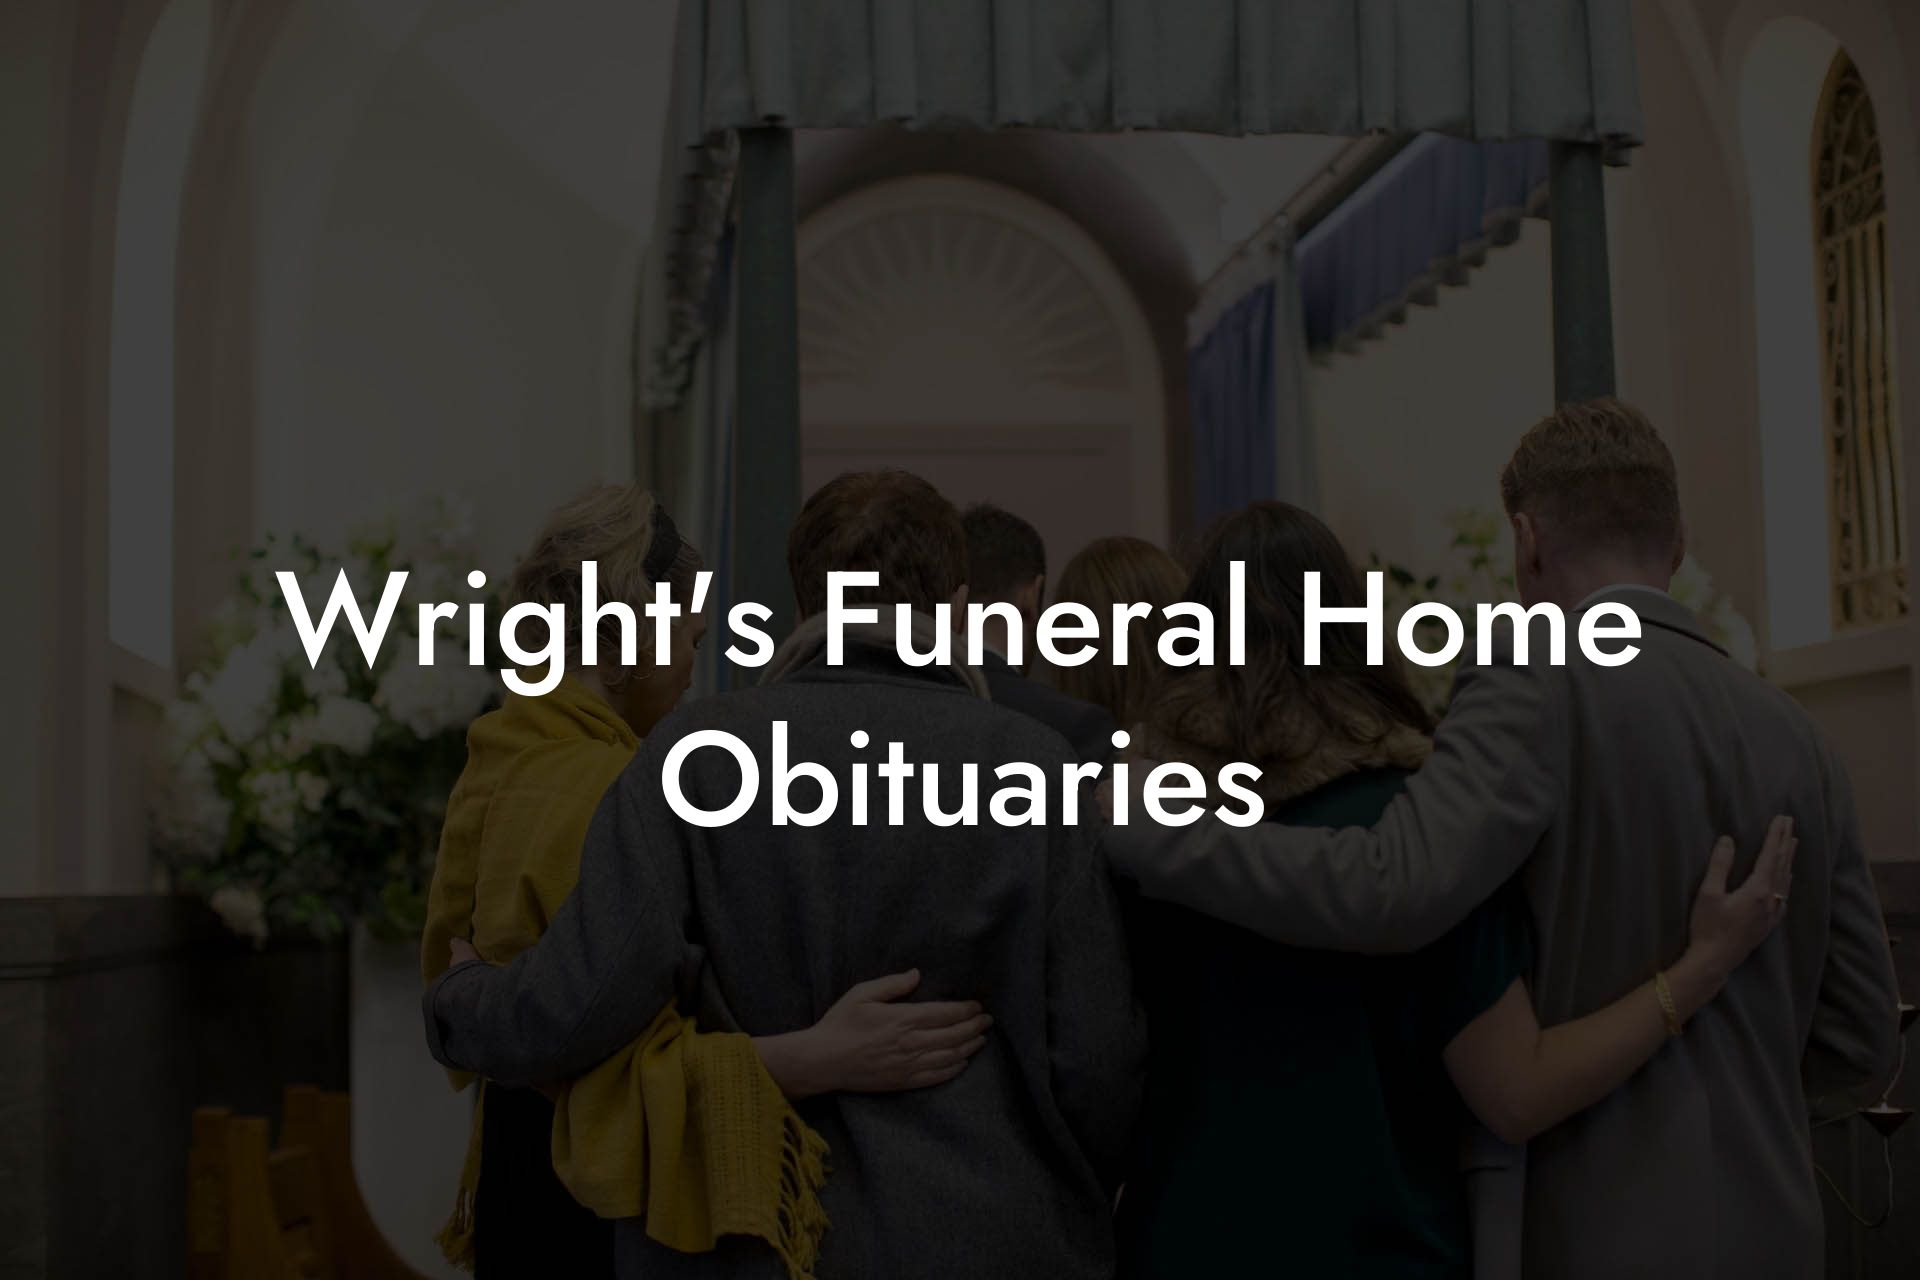 Wright's Funeral Home Obituaries